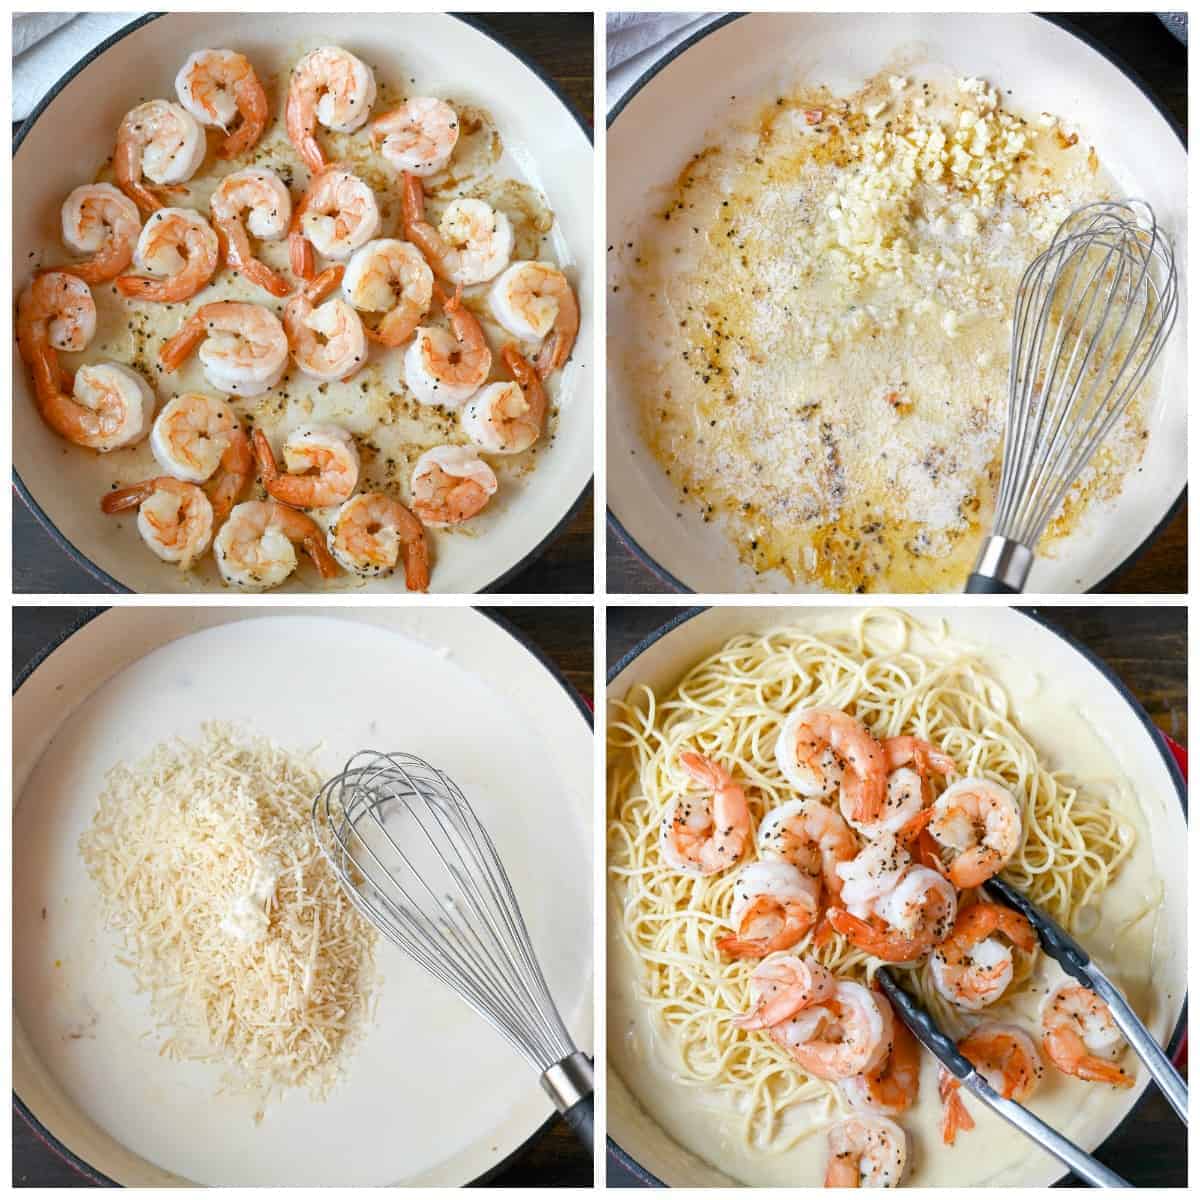 Four process shots. First one, shrimp just finishing cooking in red cast iron pan. Second one, shrimp removed and butter, garlic sauted in the pan. Third one, cream and parmesan cheese whisked into the pan. Fourth one, pasta and cooked shrimp bring placed back into the sauce.